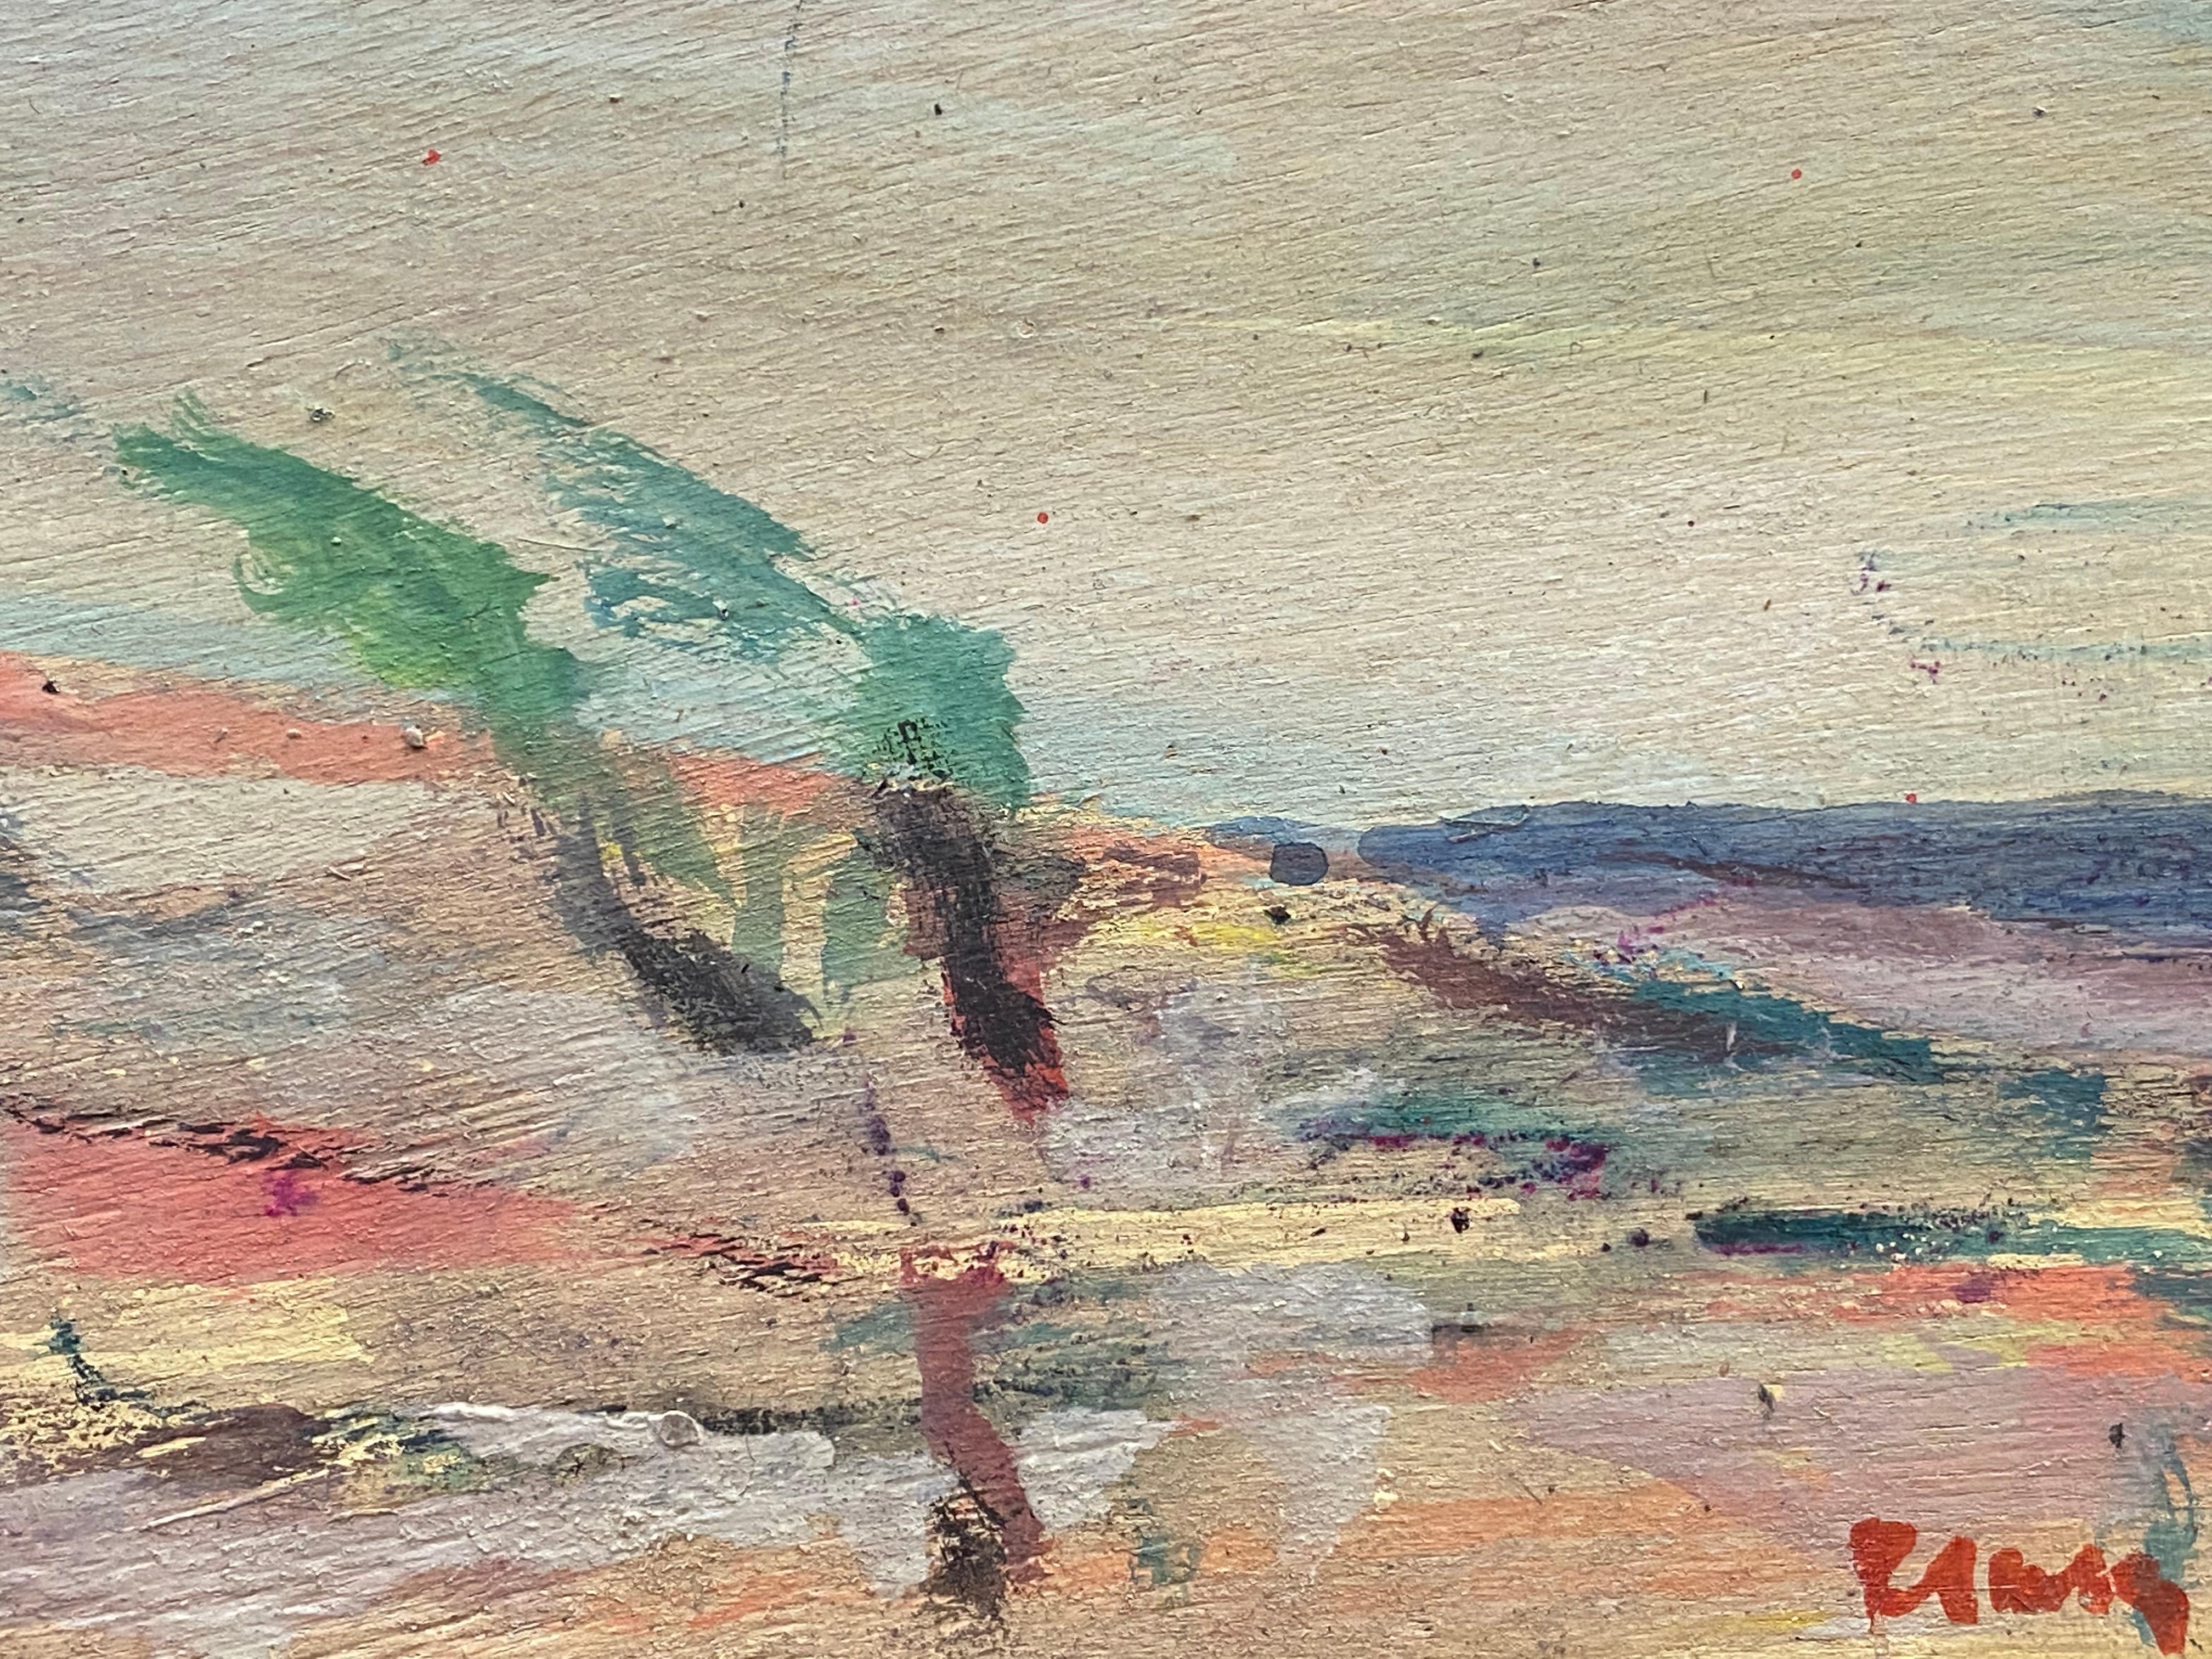 Artist/ School/ Date:
Jacques Pinon, French School, late 20th century, signed

Title:
Expressionist landscape composition

Medium & Size:
oil painting on board: 5 x 8.5 inches, unframed.
Signed 

Condition:
the painting is in sound